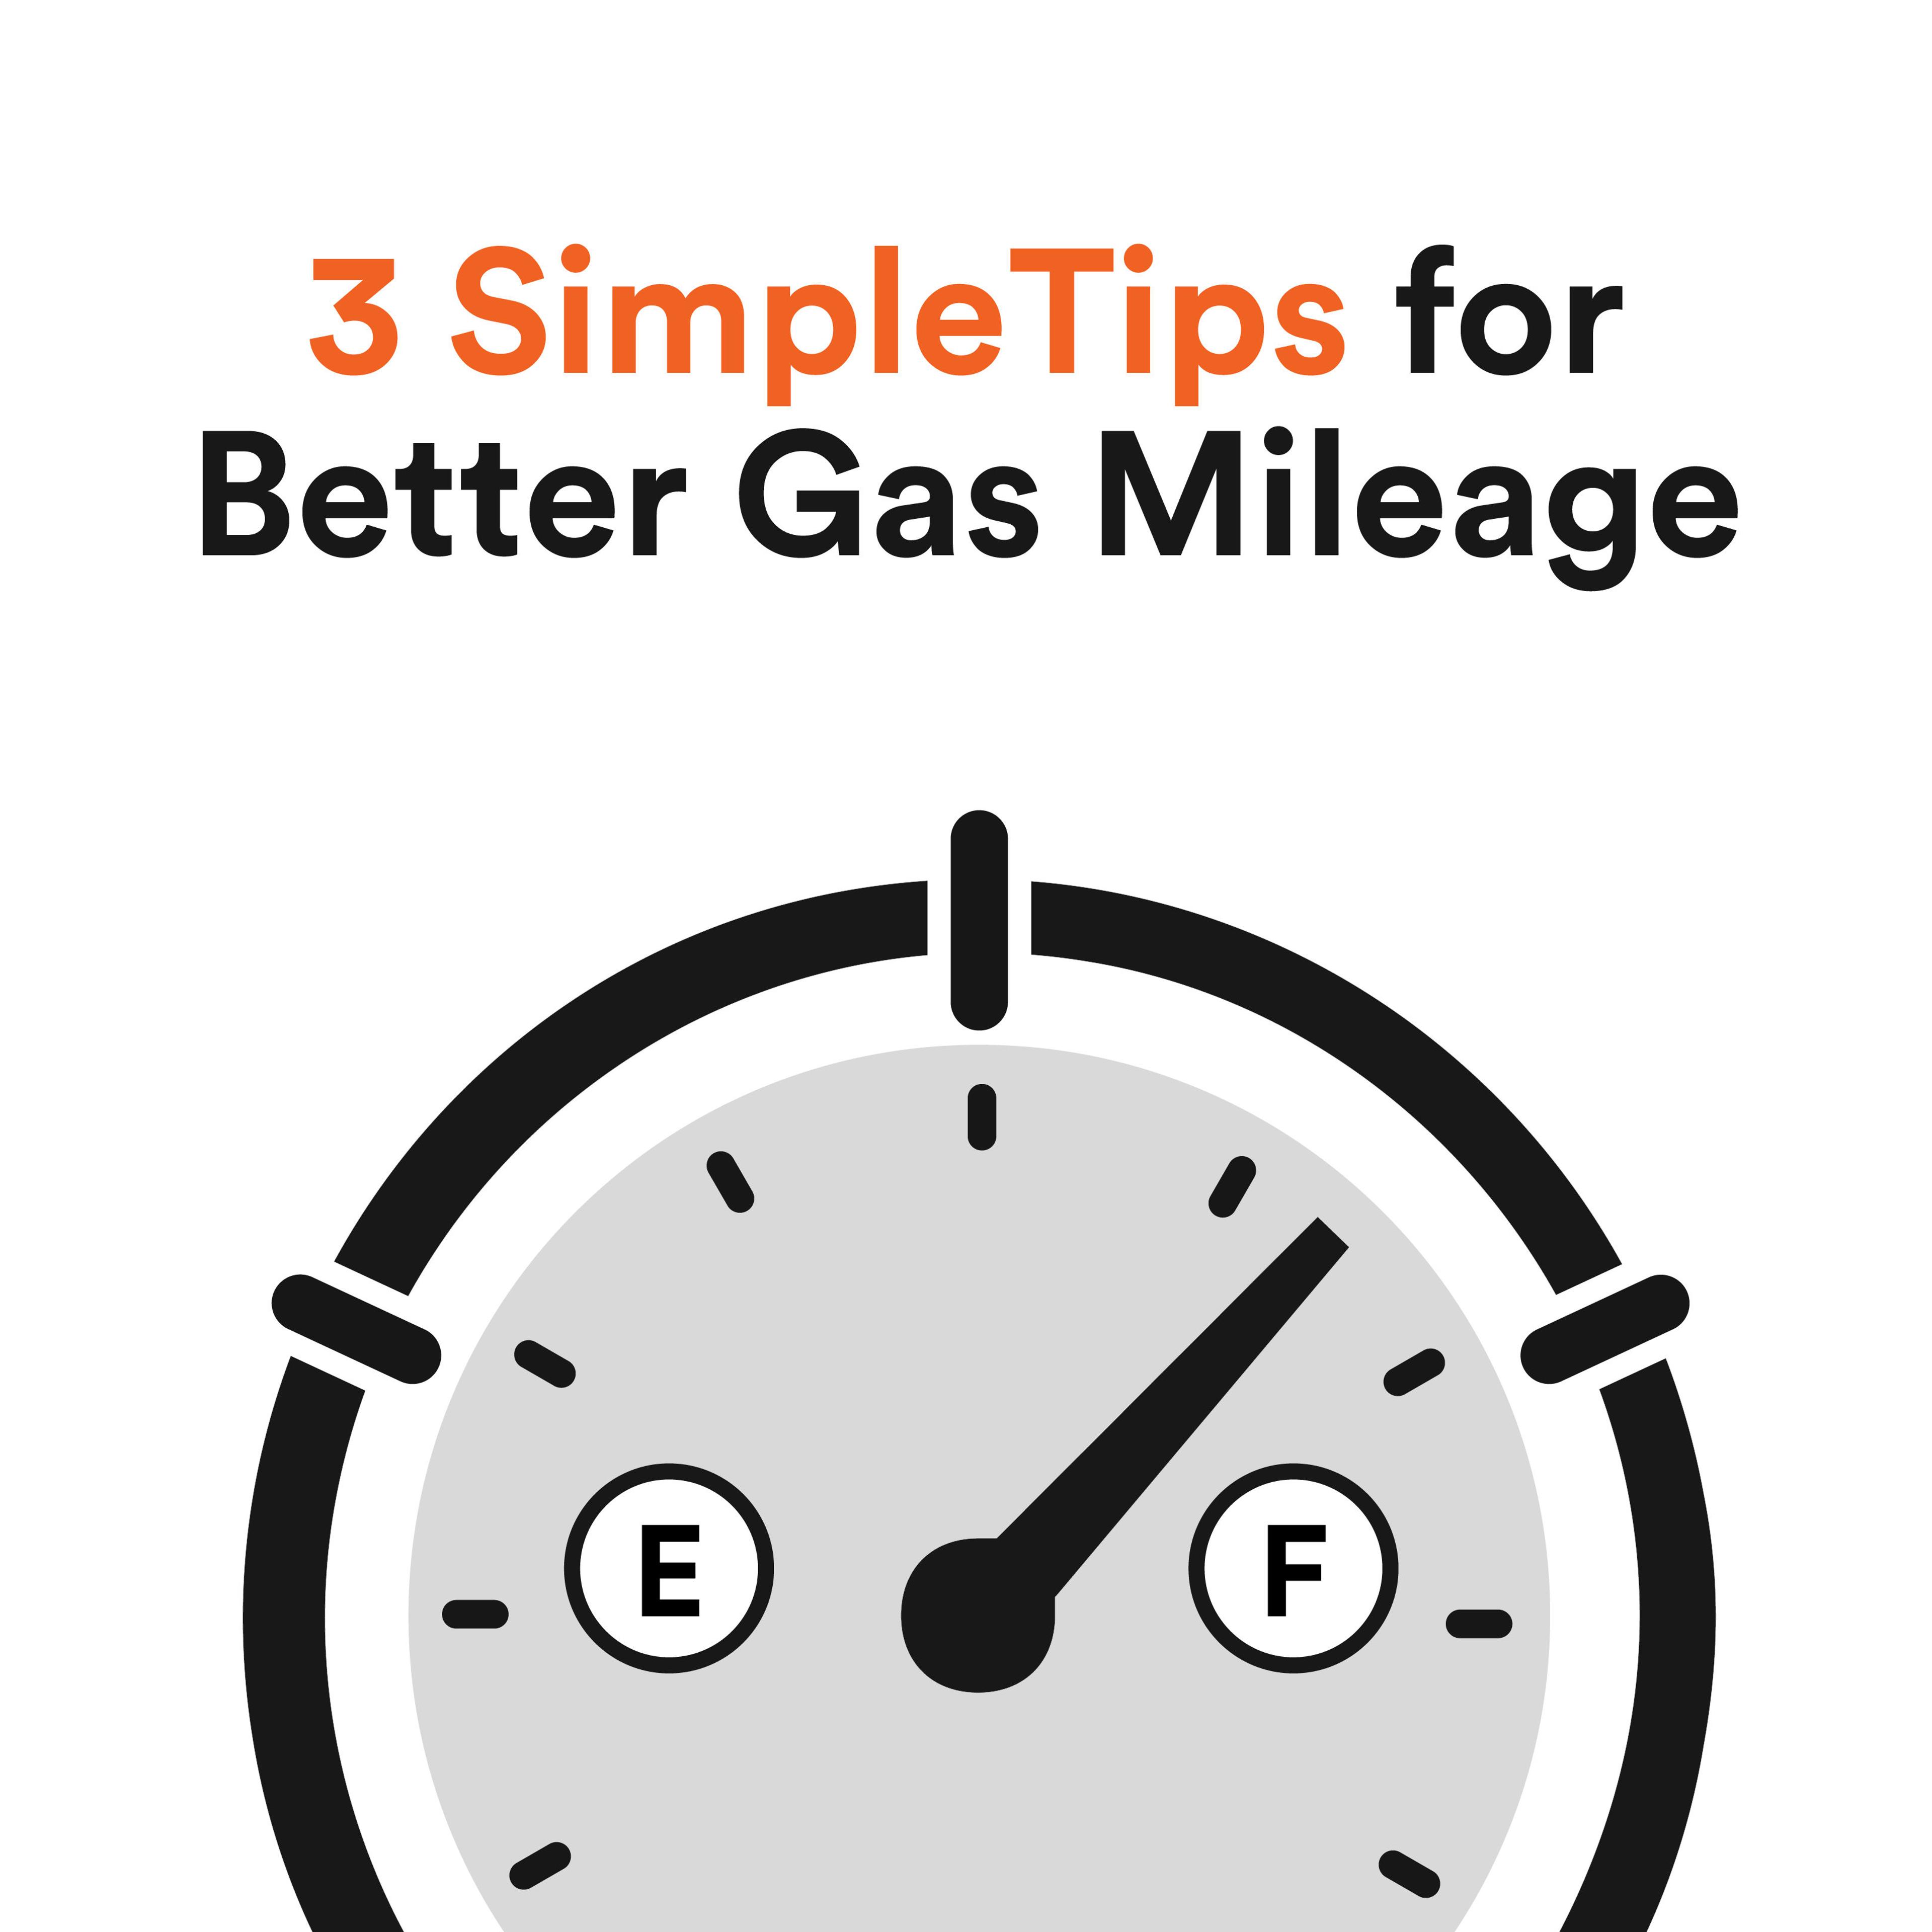 3 SimpleTips for Better Gas Mileage